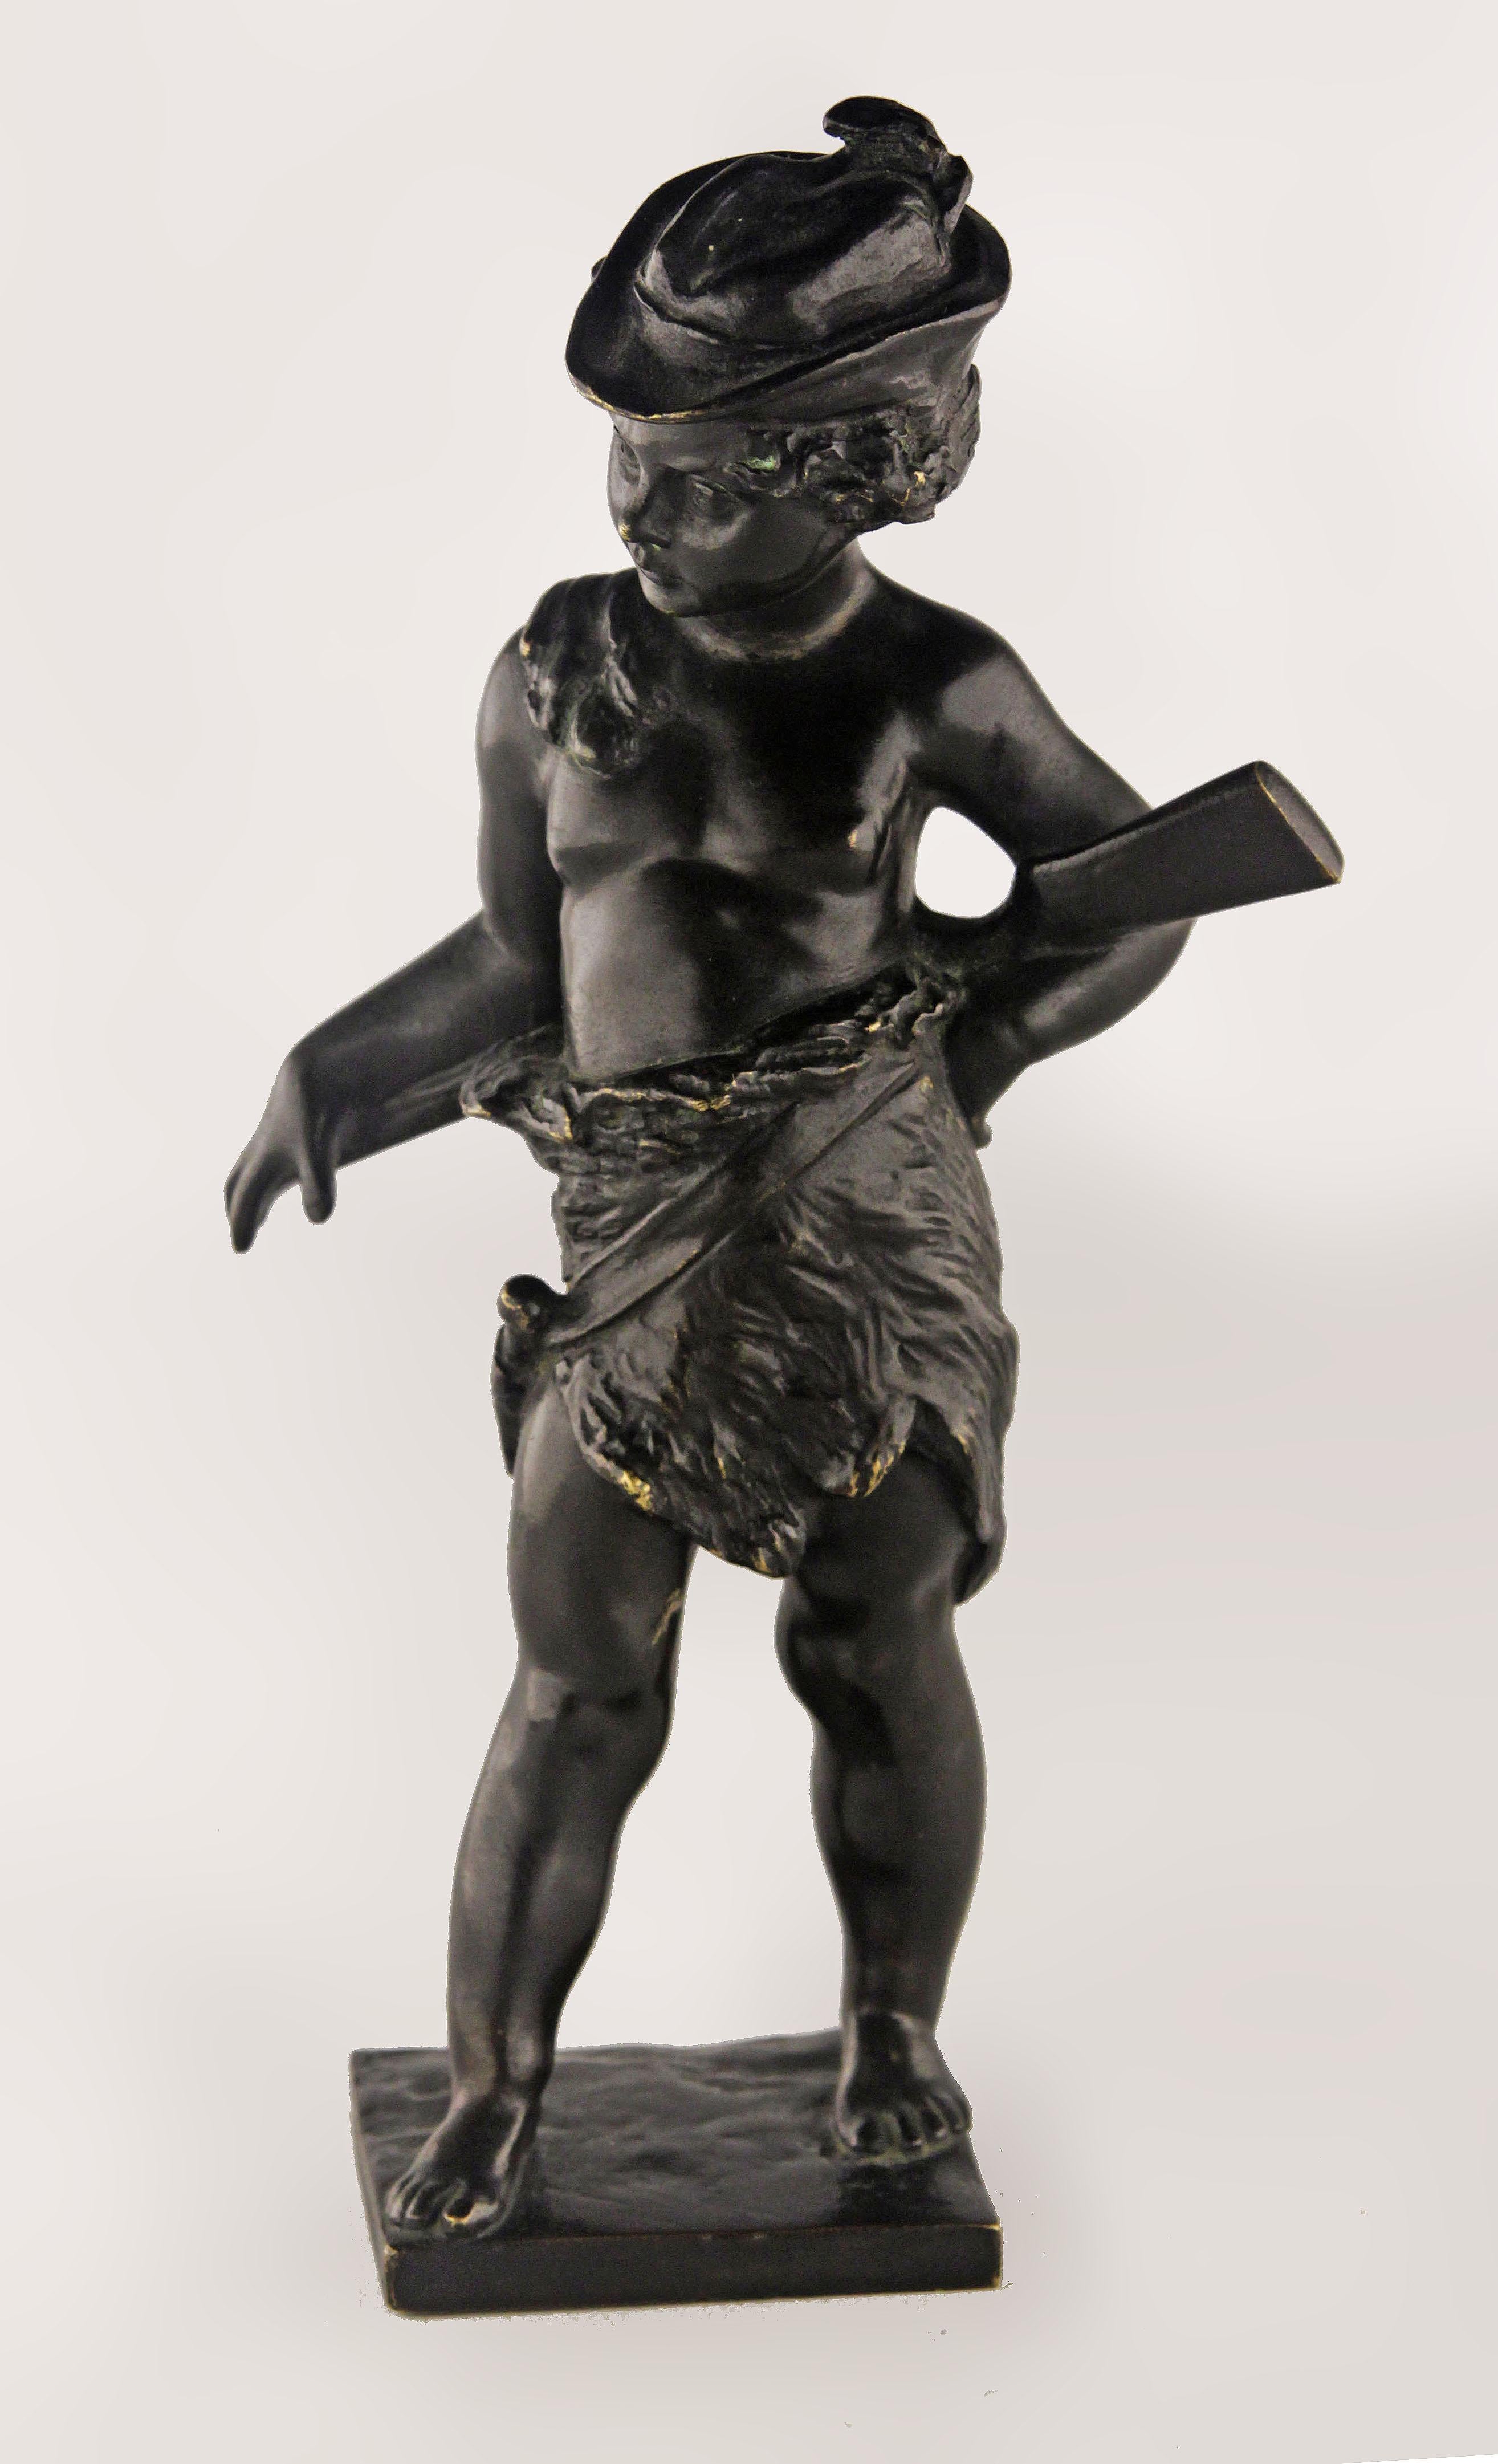 Late 19th century Romantic french black patina bronze sculpture of a hunter boy with riffle

By: unknown
Material: bronze, copper, metal
Technique: cast, molded, patinated, polished, metalwork
Dimensions: 2 in x 3 in x 7 in
Date: late 19th